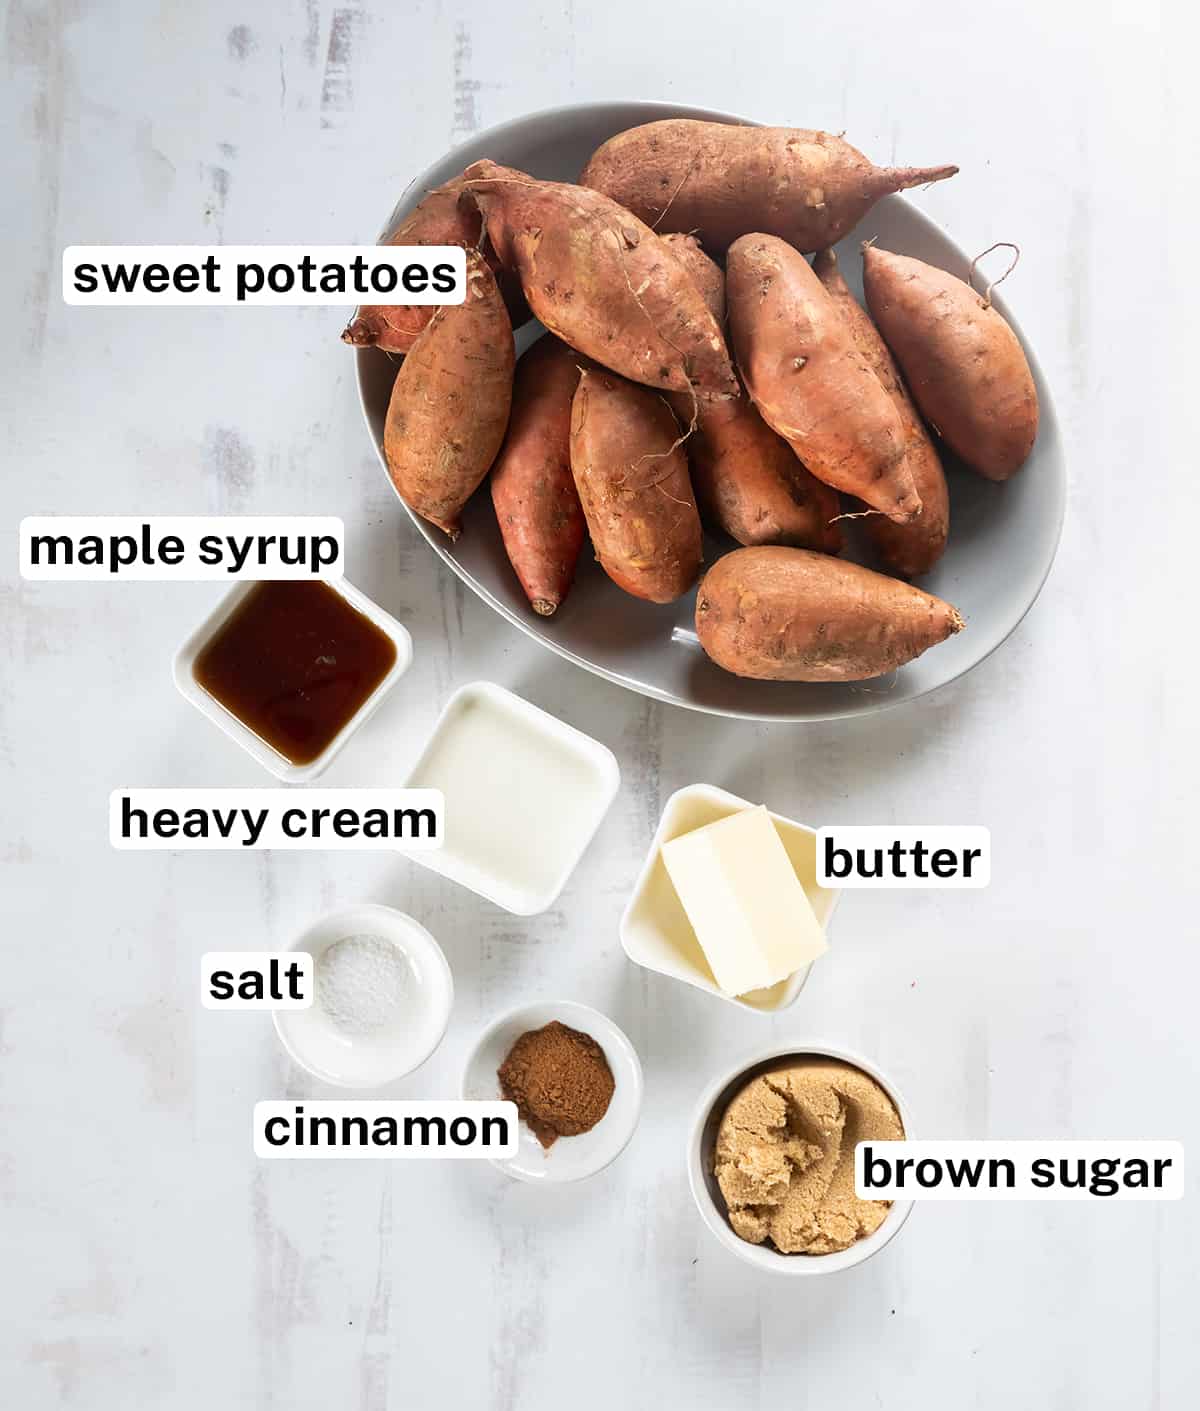 Ingredients for Maple Glazed Sweet Potatoes with overlay text.